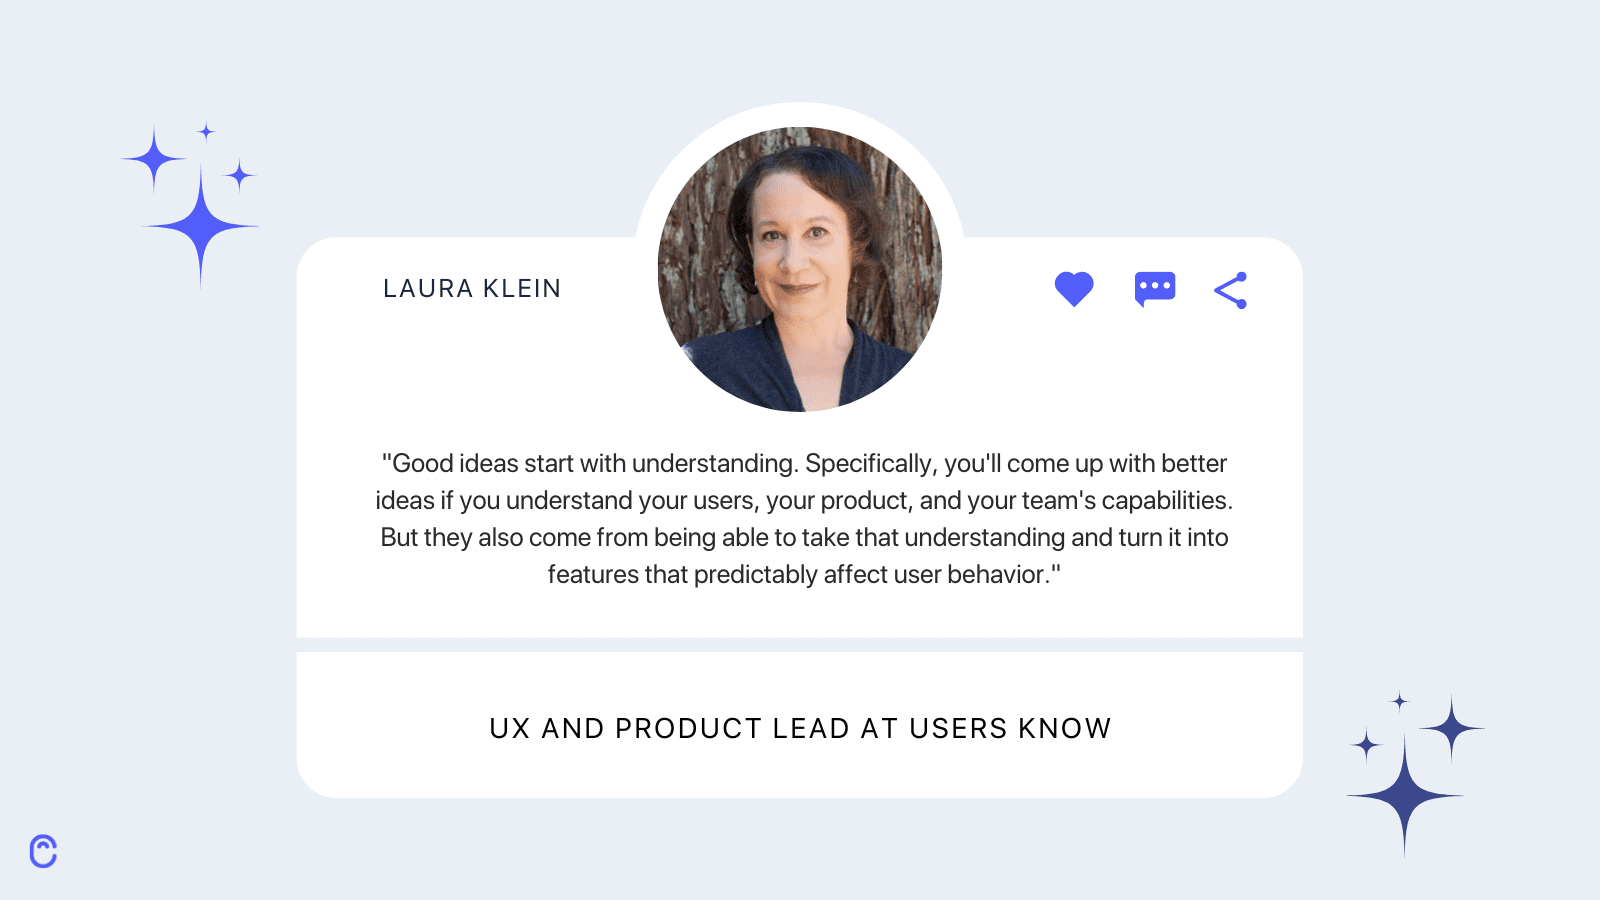 Laura Klein, UX and product lead at Users Know
